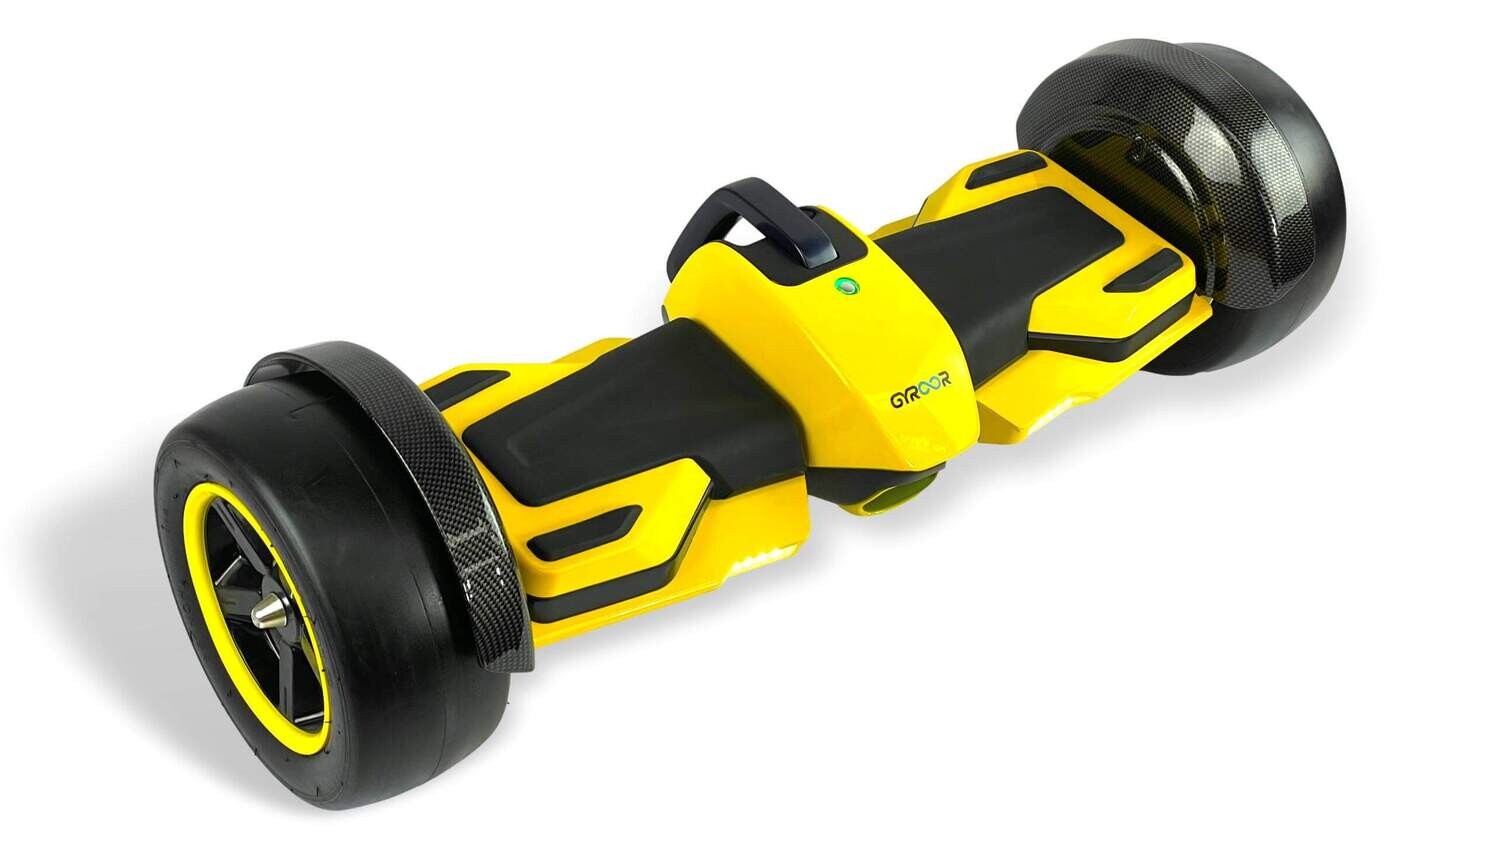 All Terrain Off-Road F1 Hoverboard Segway Hoverboard Self Balance Scooter with Racing Sound